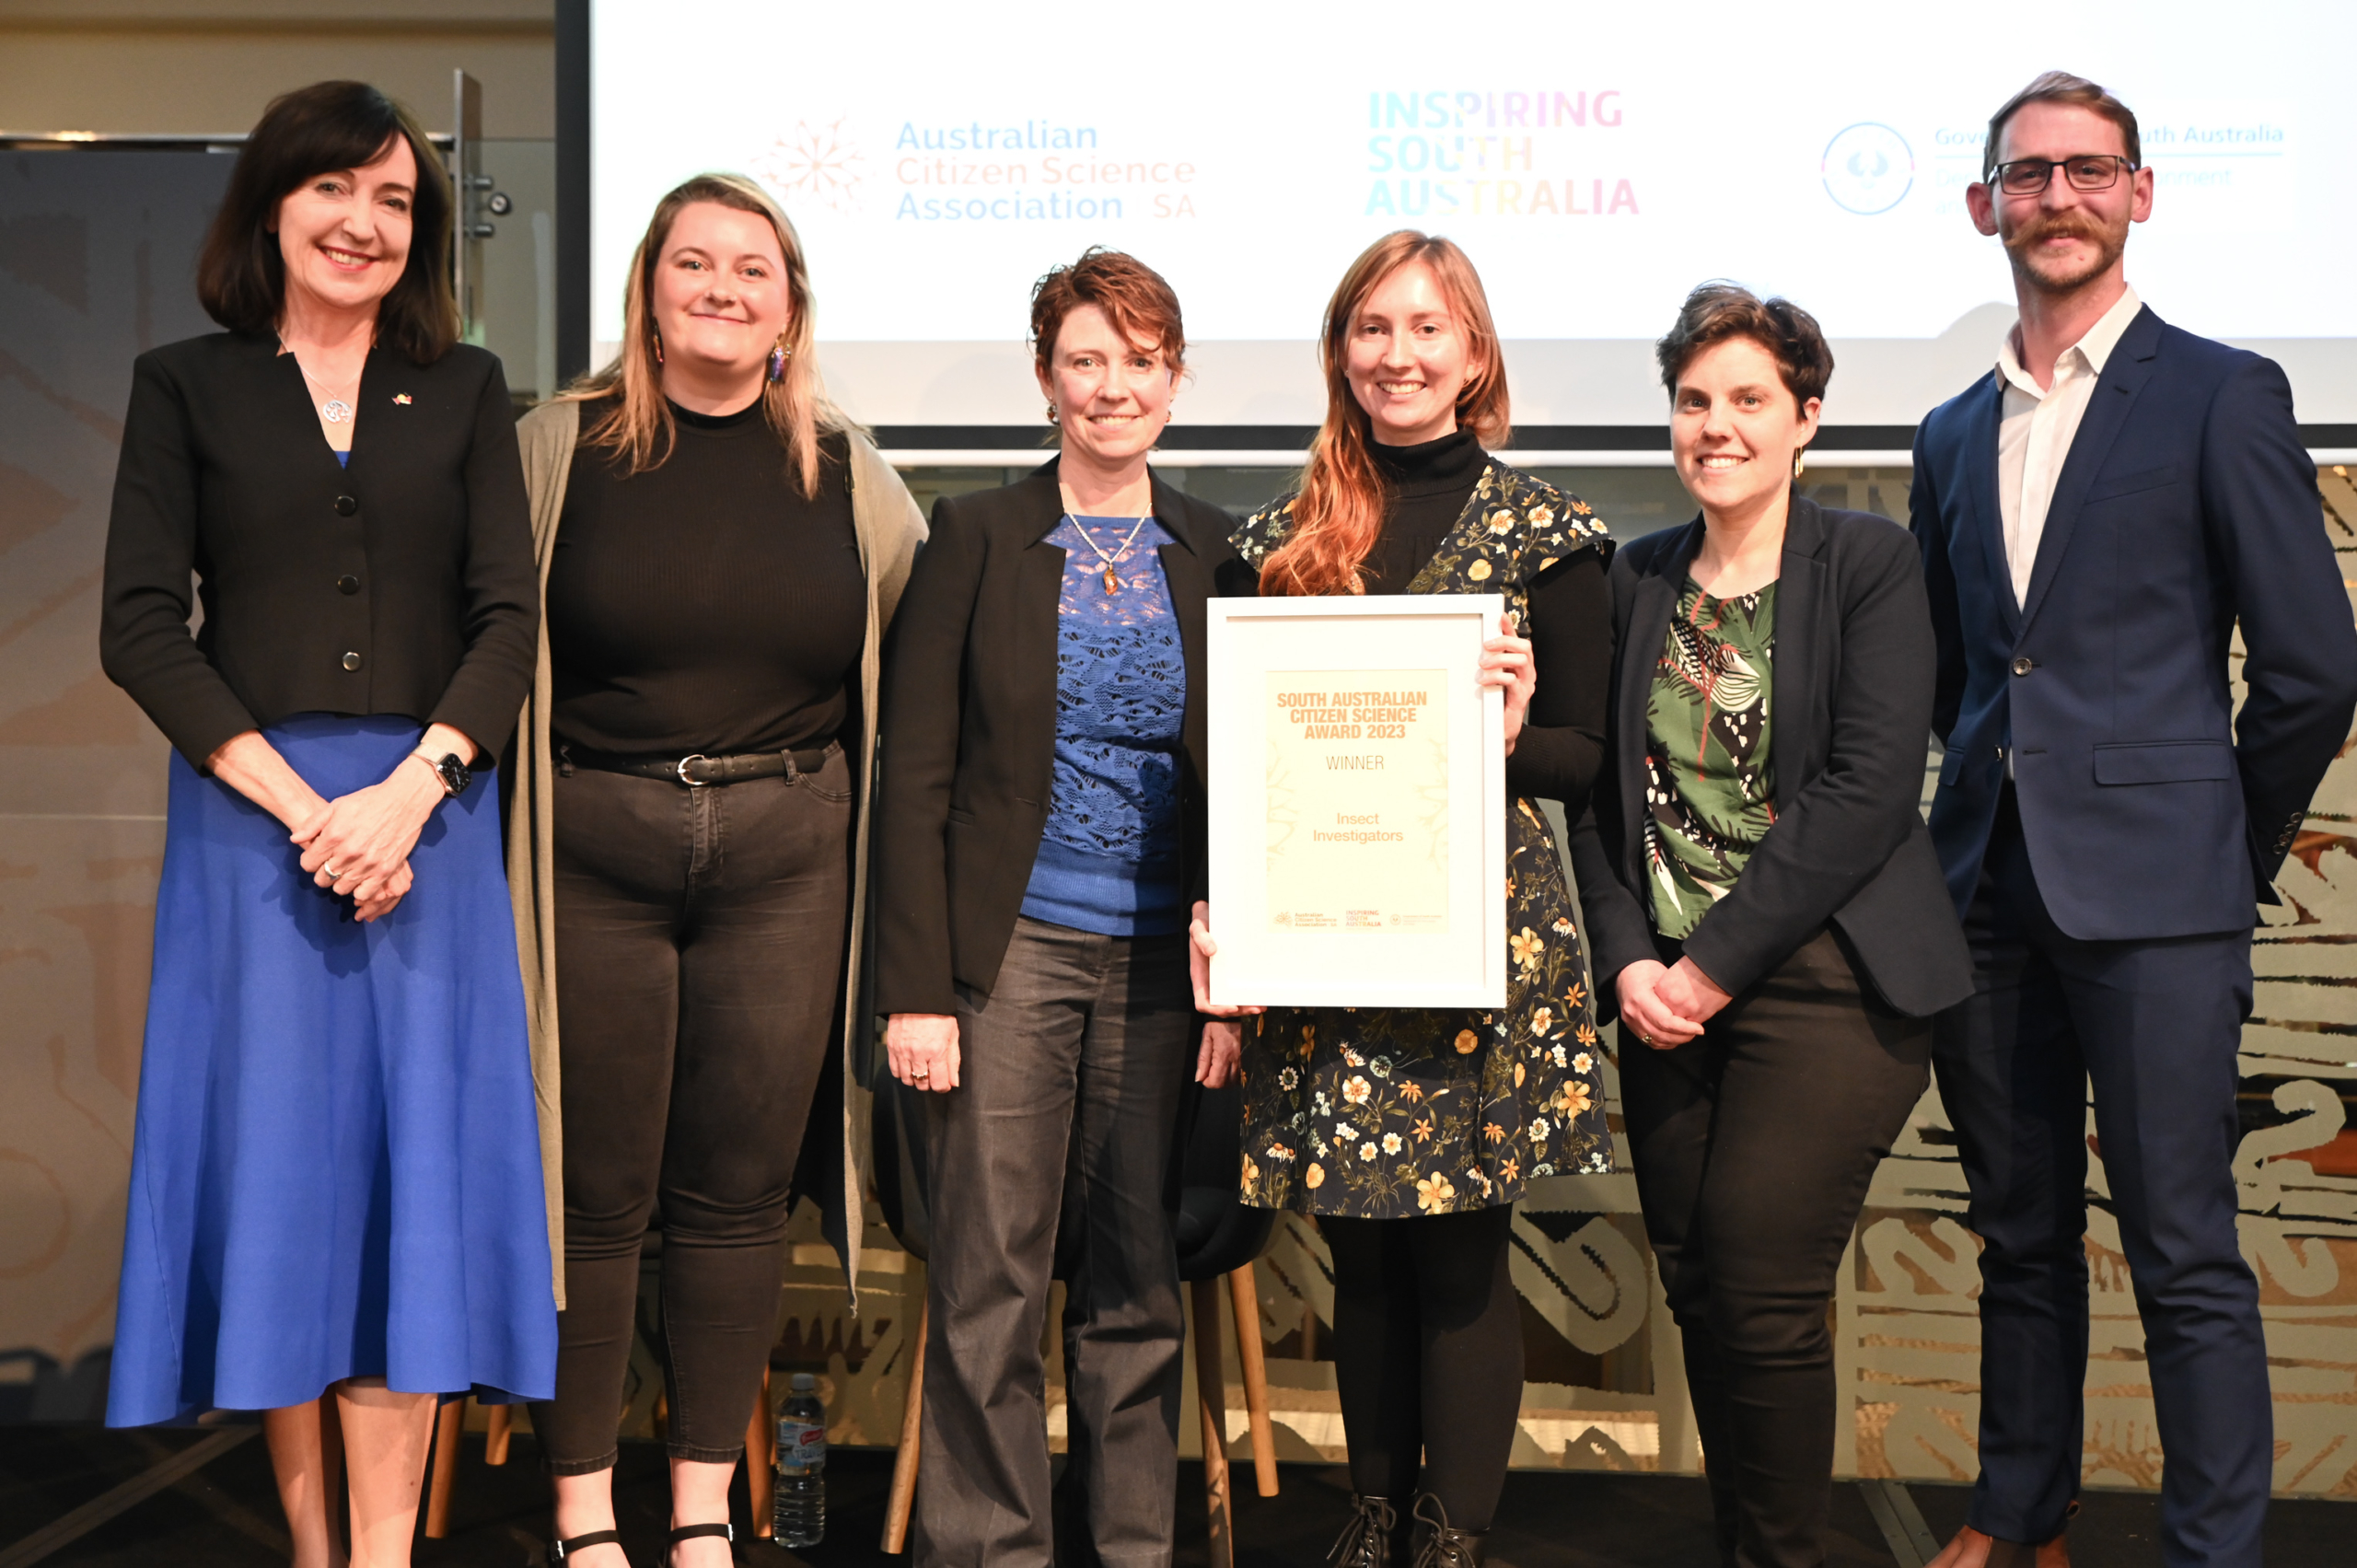 6 people stand on a stay with the 4th person from the left holding the Citizen Science Award winner certificate.